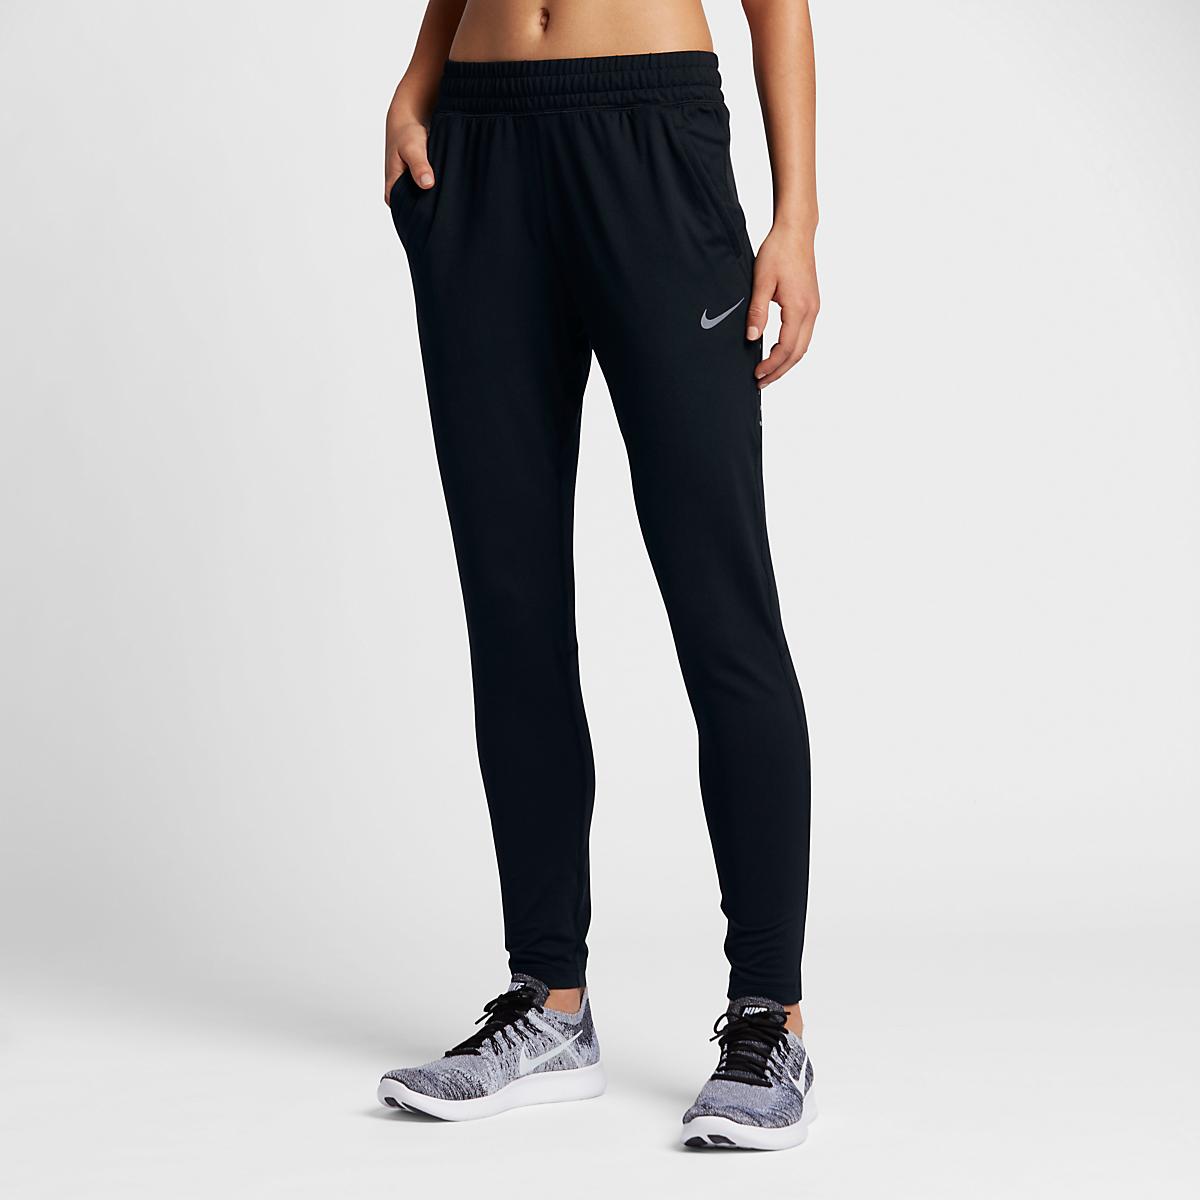 Womens Nike Dry Element Pants at Road Runner Sports